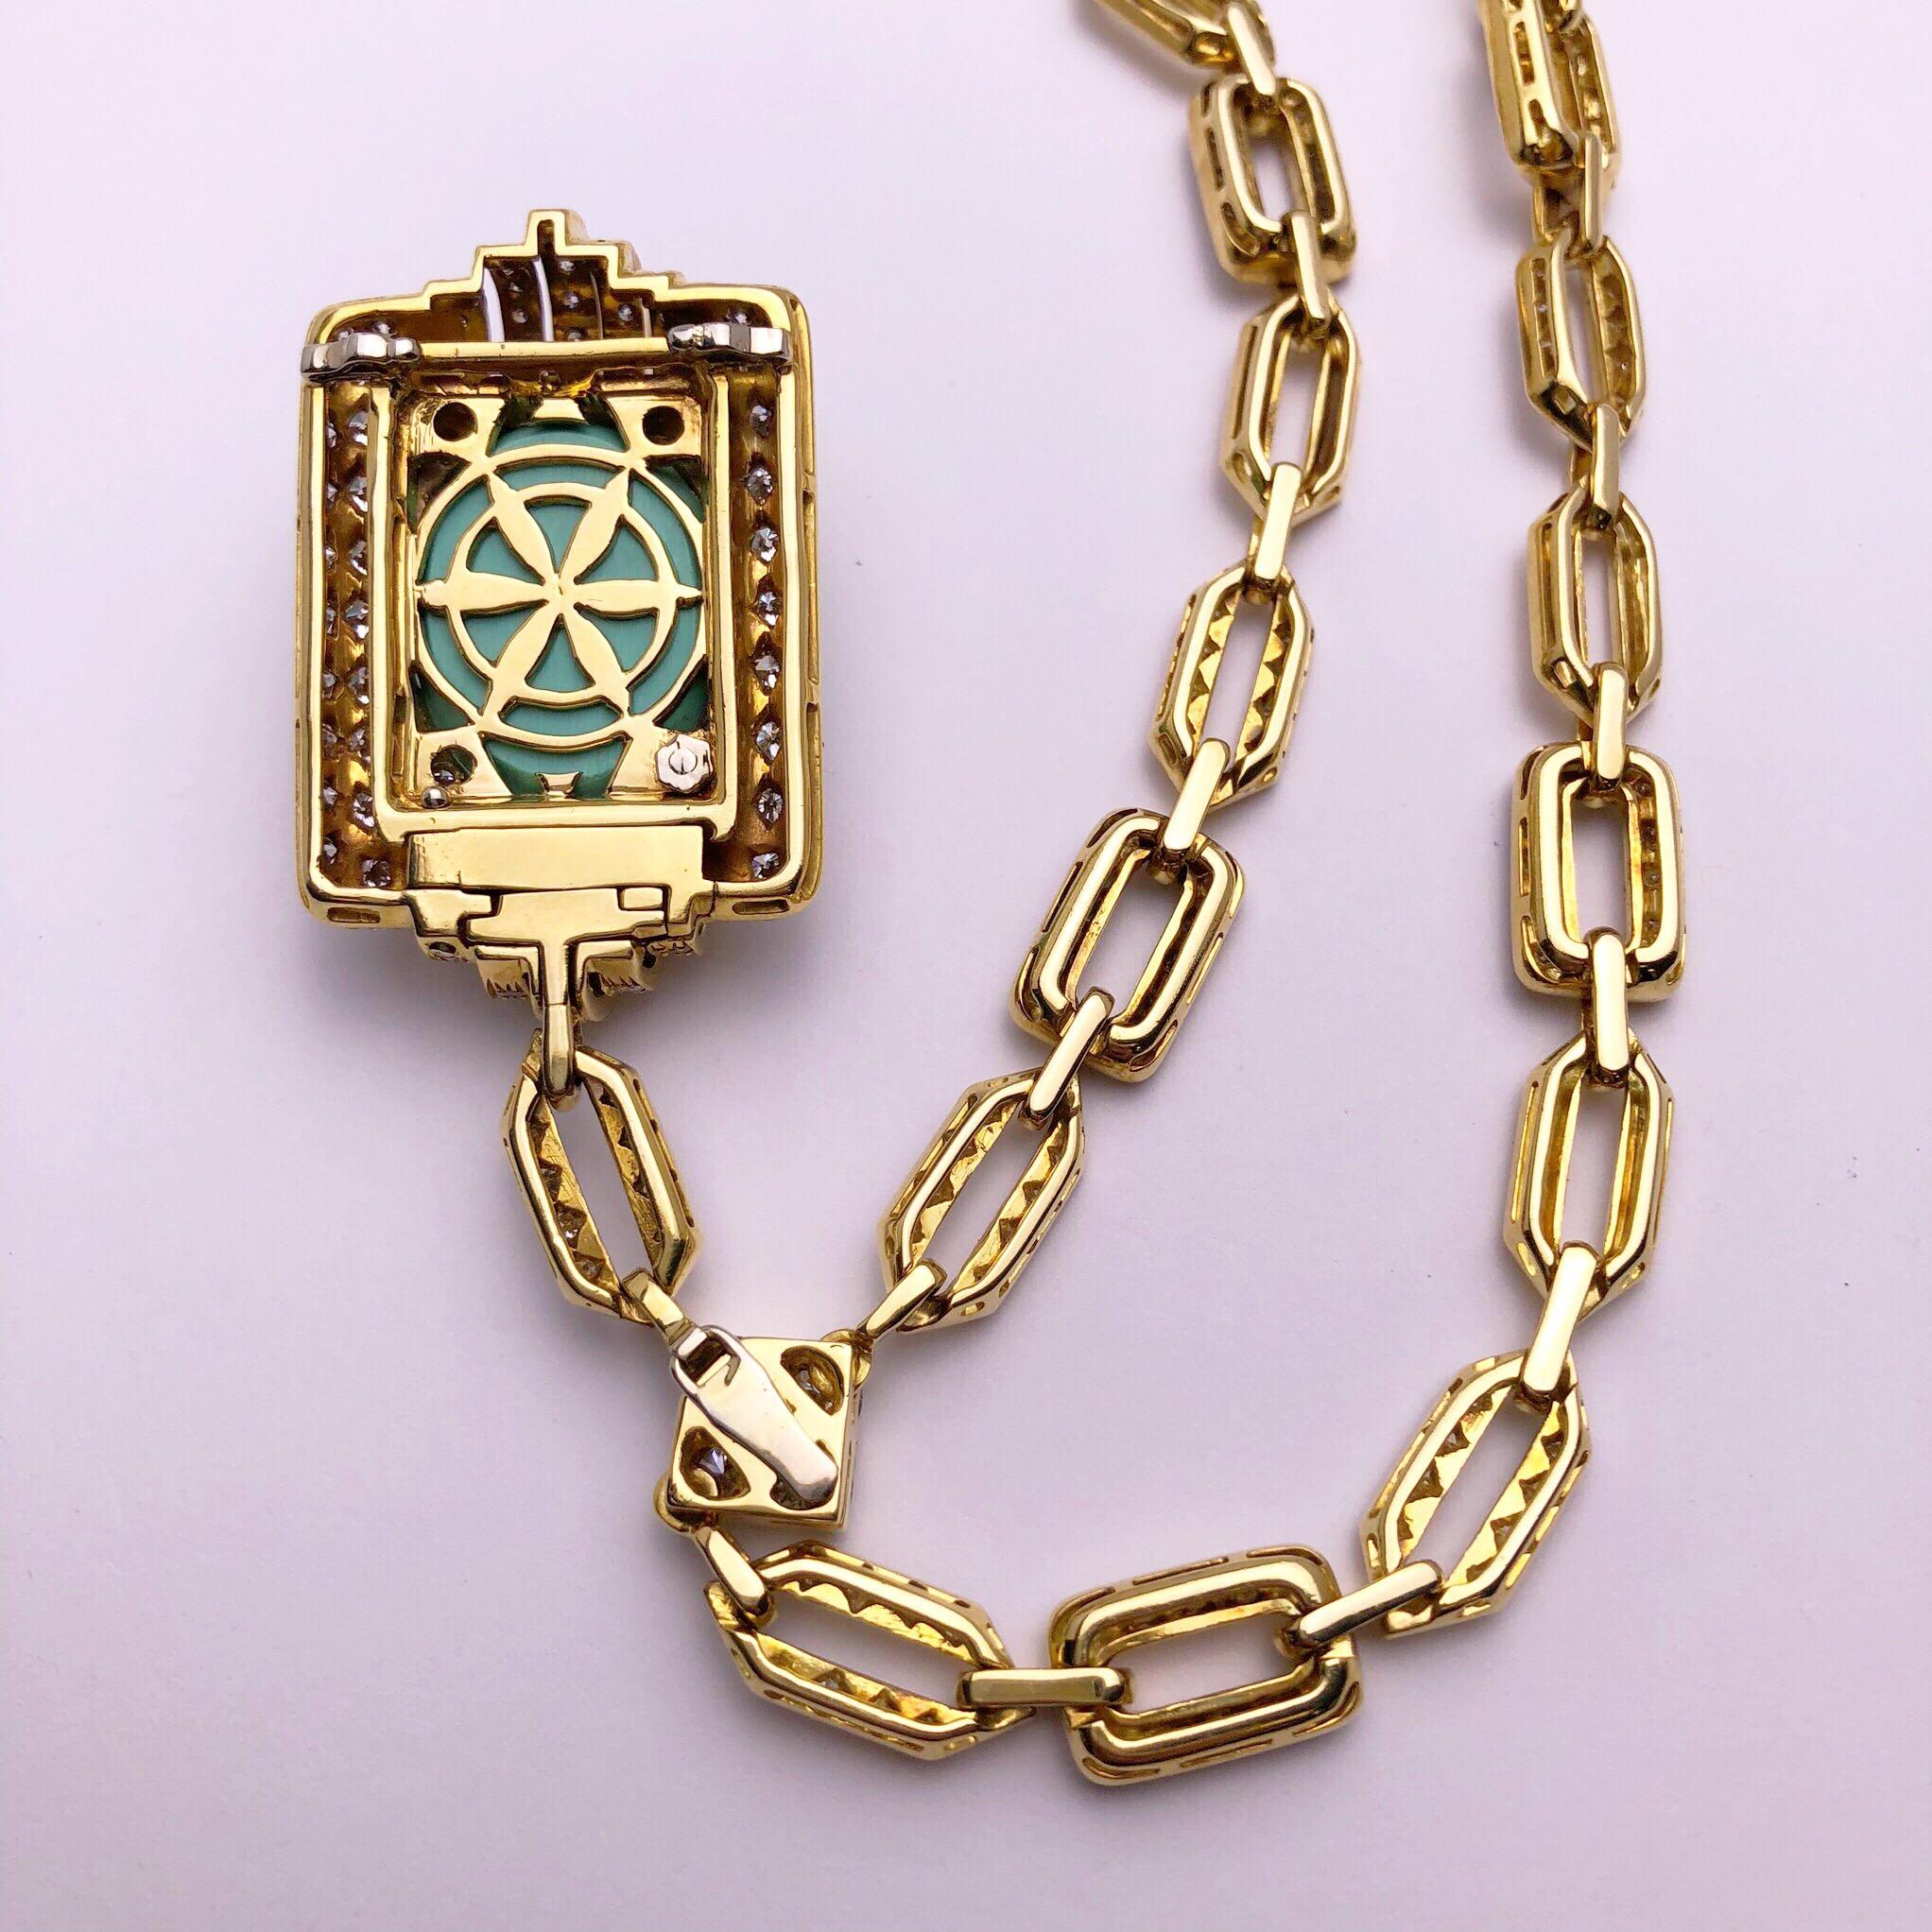 Art Deco Vintage 18Kt Gold, 9.42ct. Diamond Necklace with a 21.02ct Persian Turquoise